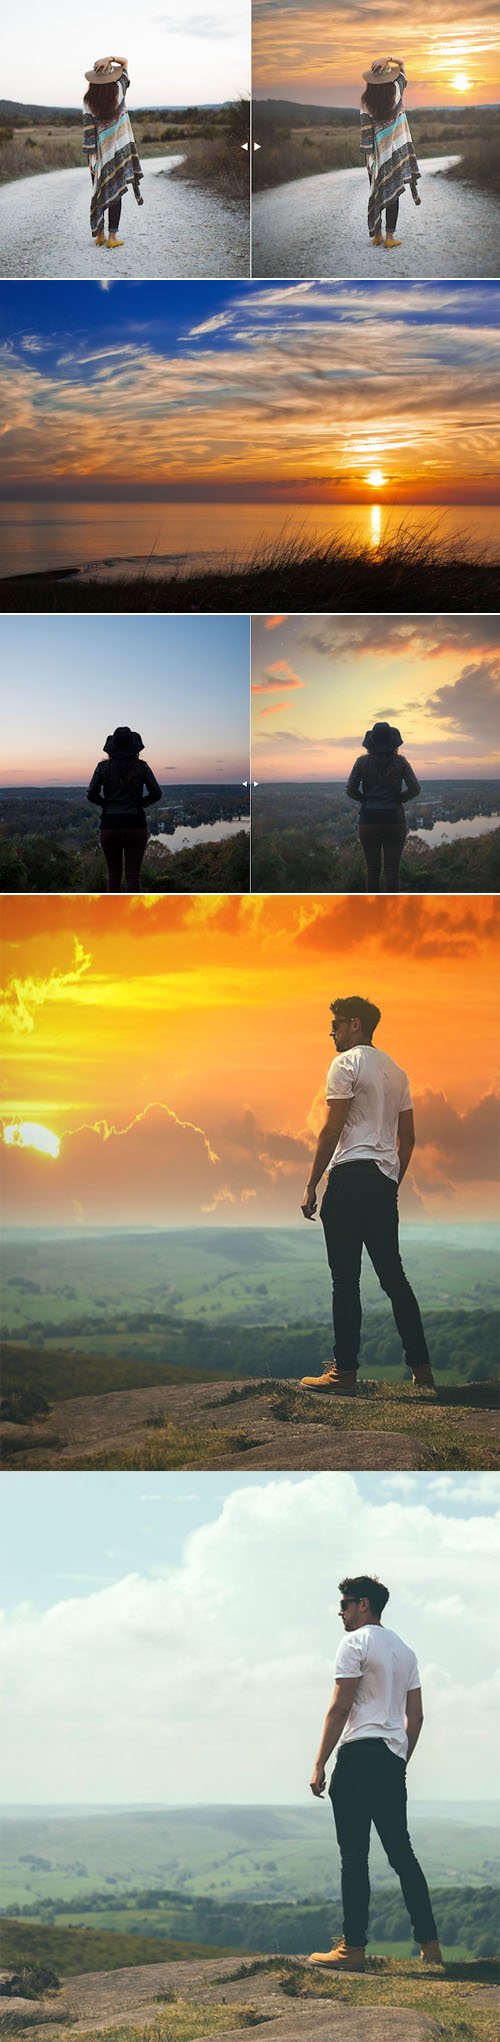 Sunset Skies Effects for Photoshop + Tutorial